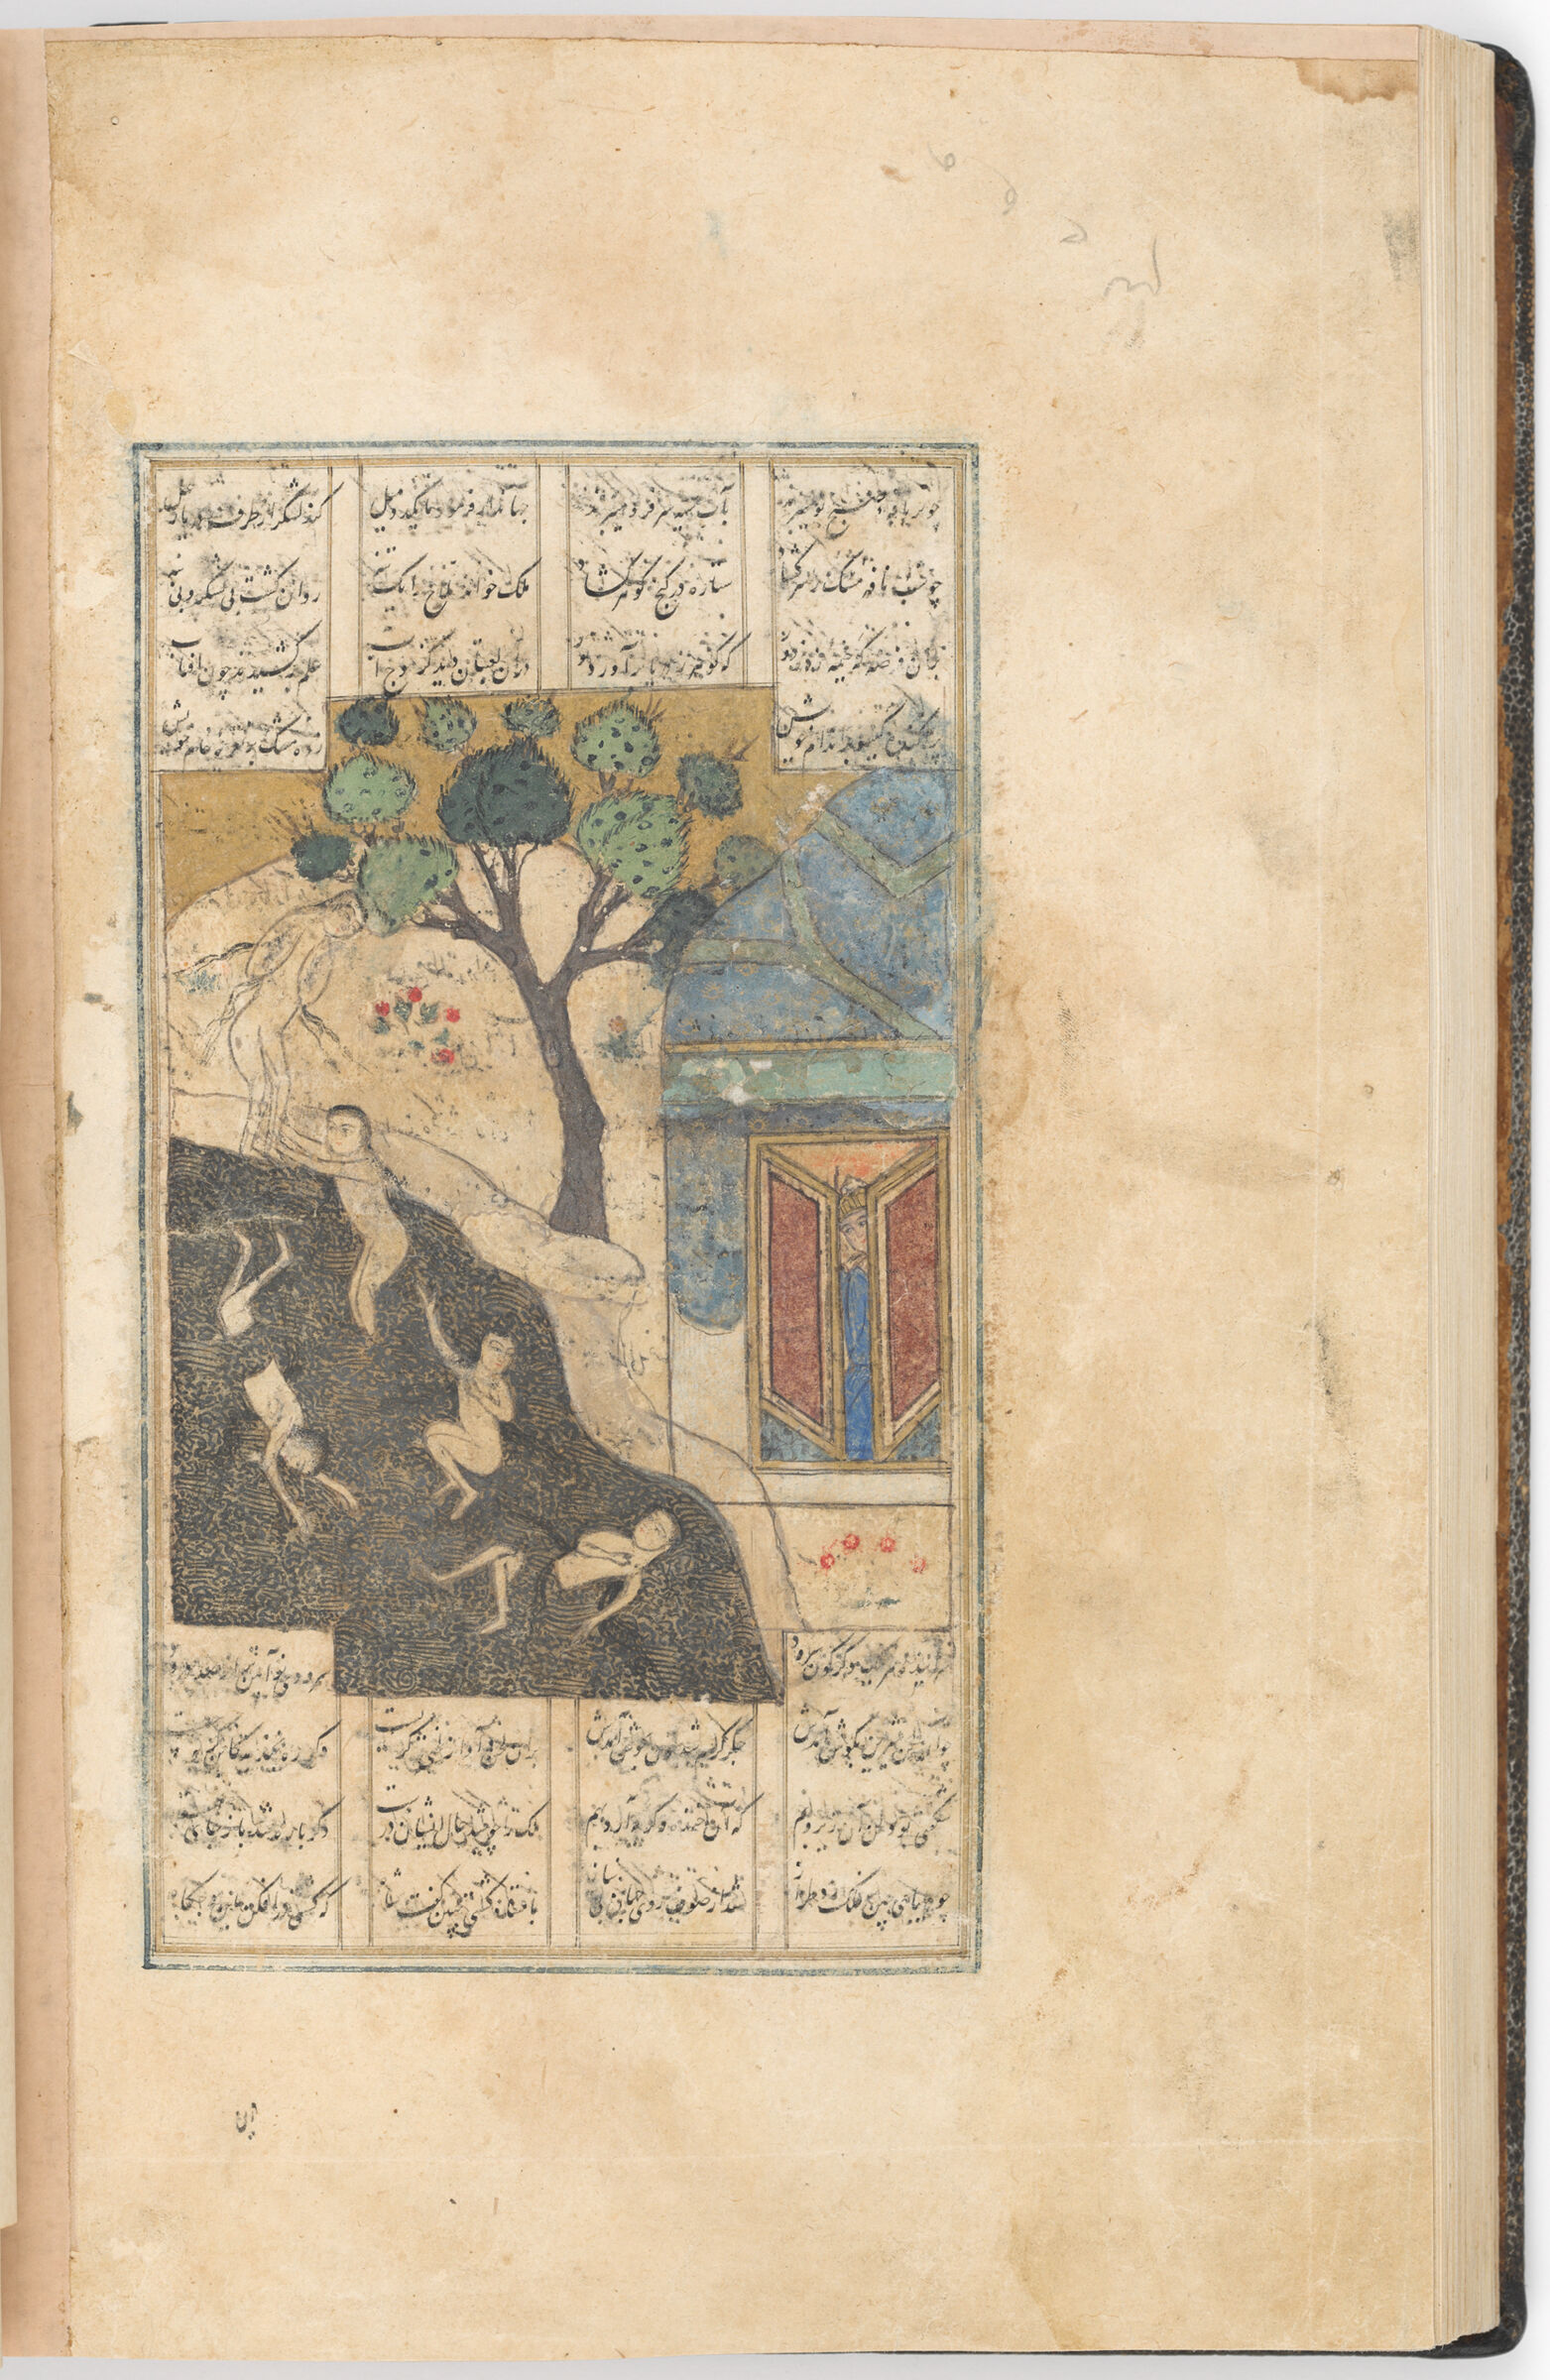 Iskandar Watching Bathing Maidens (Text Recto; Painting Verso Of Folio 164), Painting From A Manuscript Of The Khamsa By Nizami